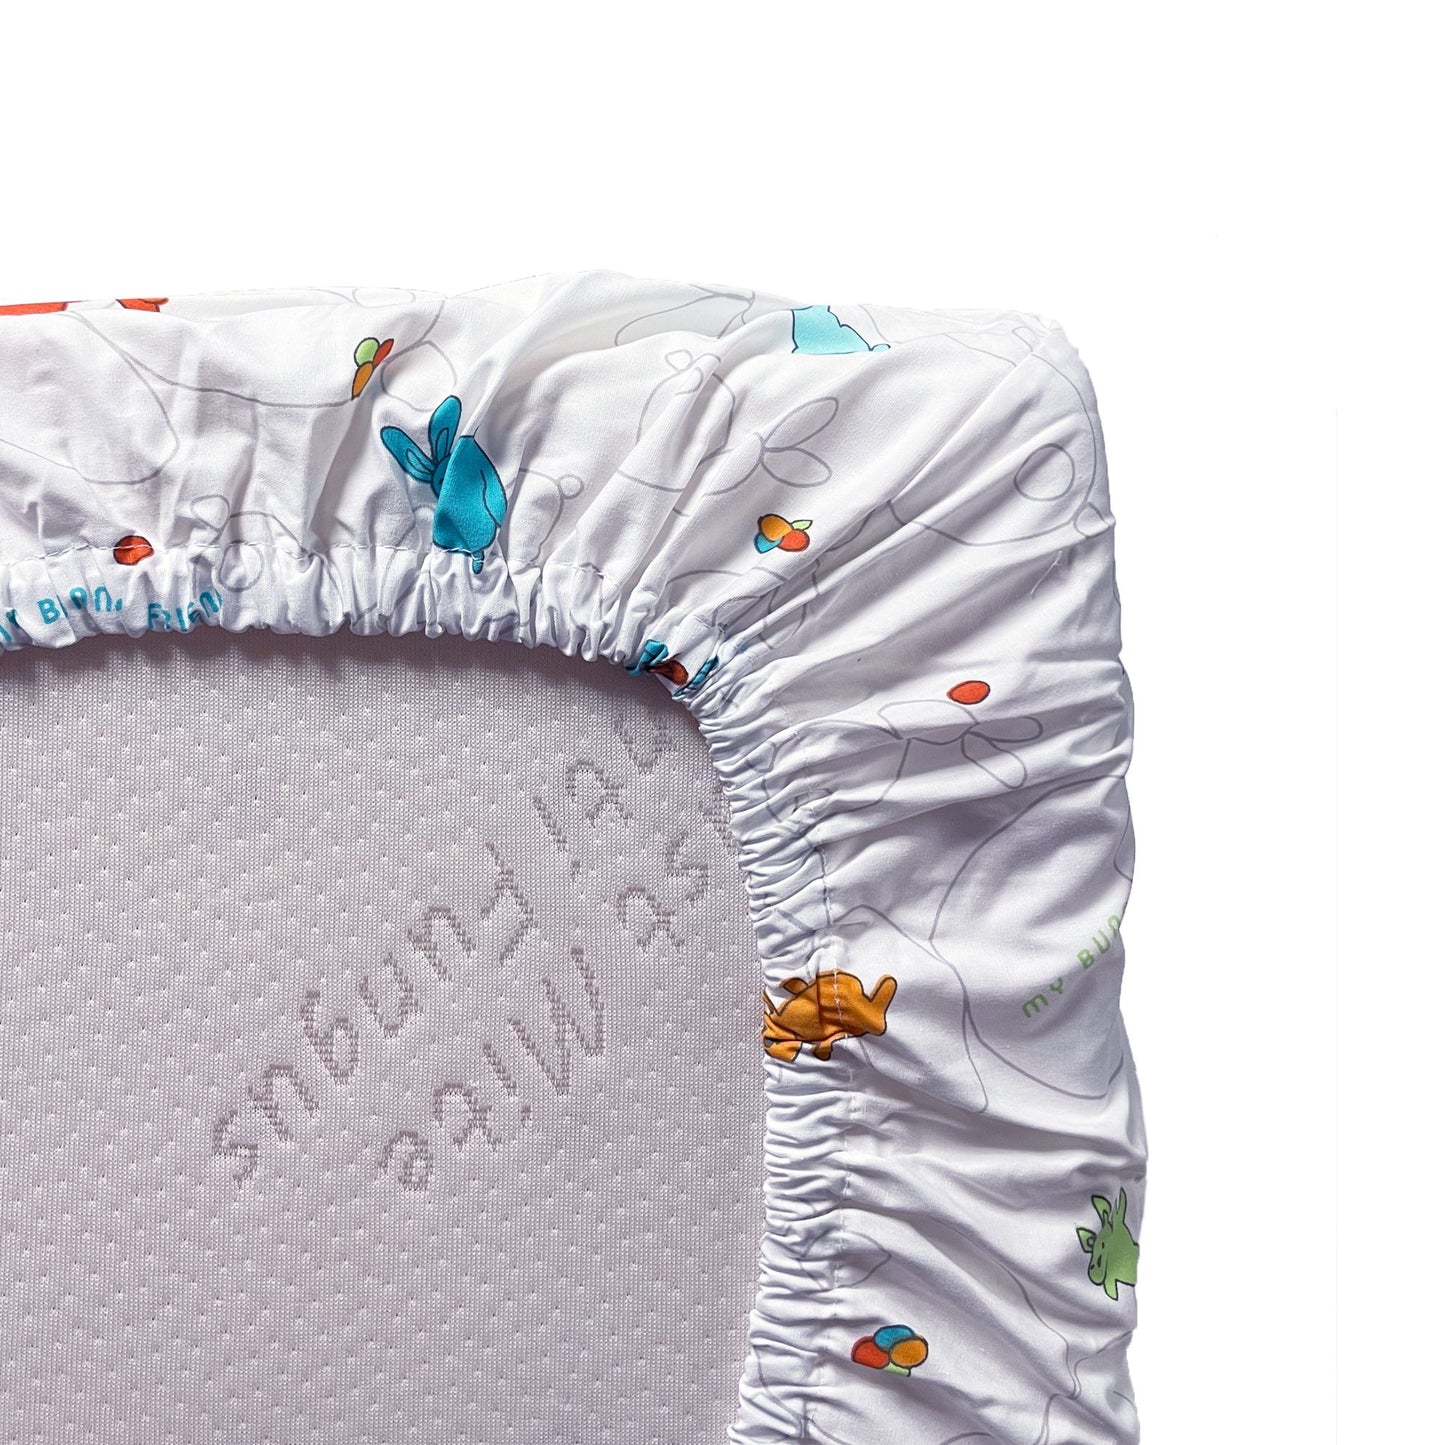 My Bunny Friend Fitted Sheet For Baby Mattress (Bunny Party)